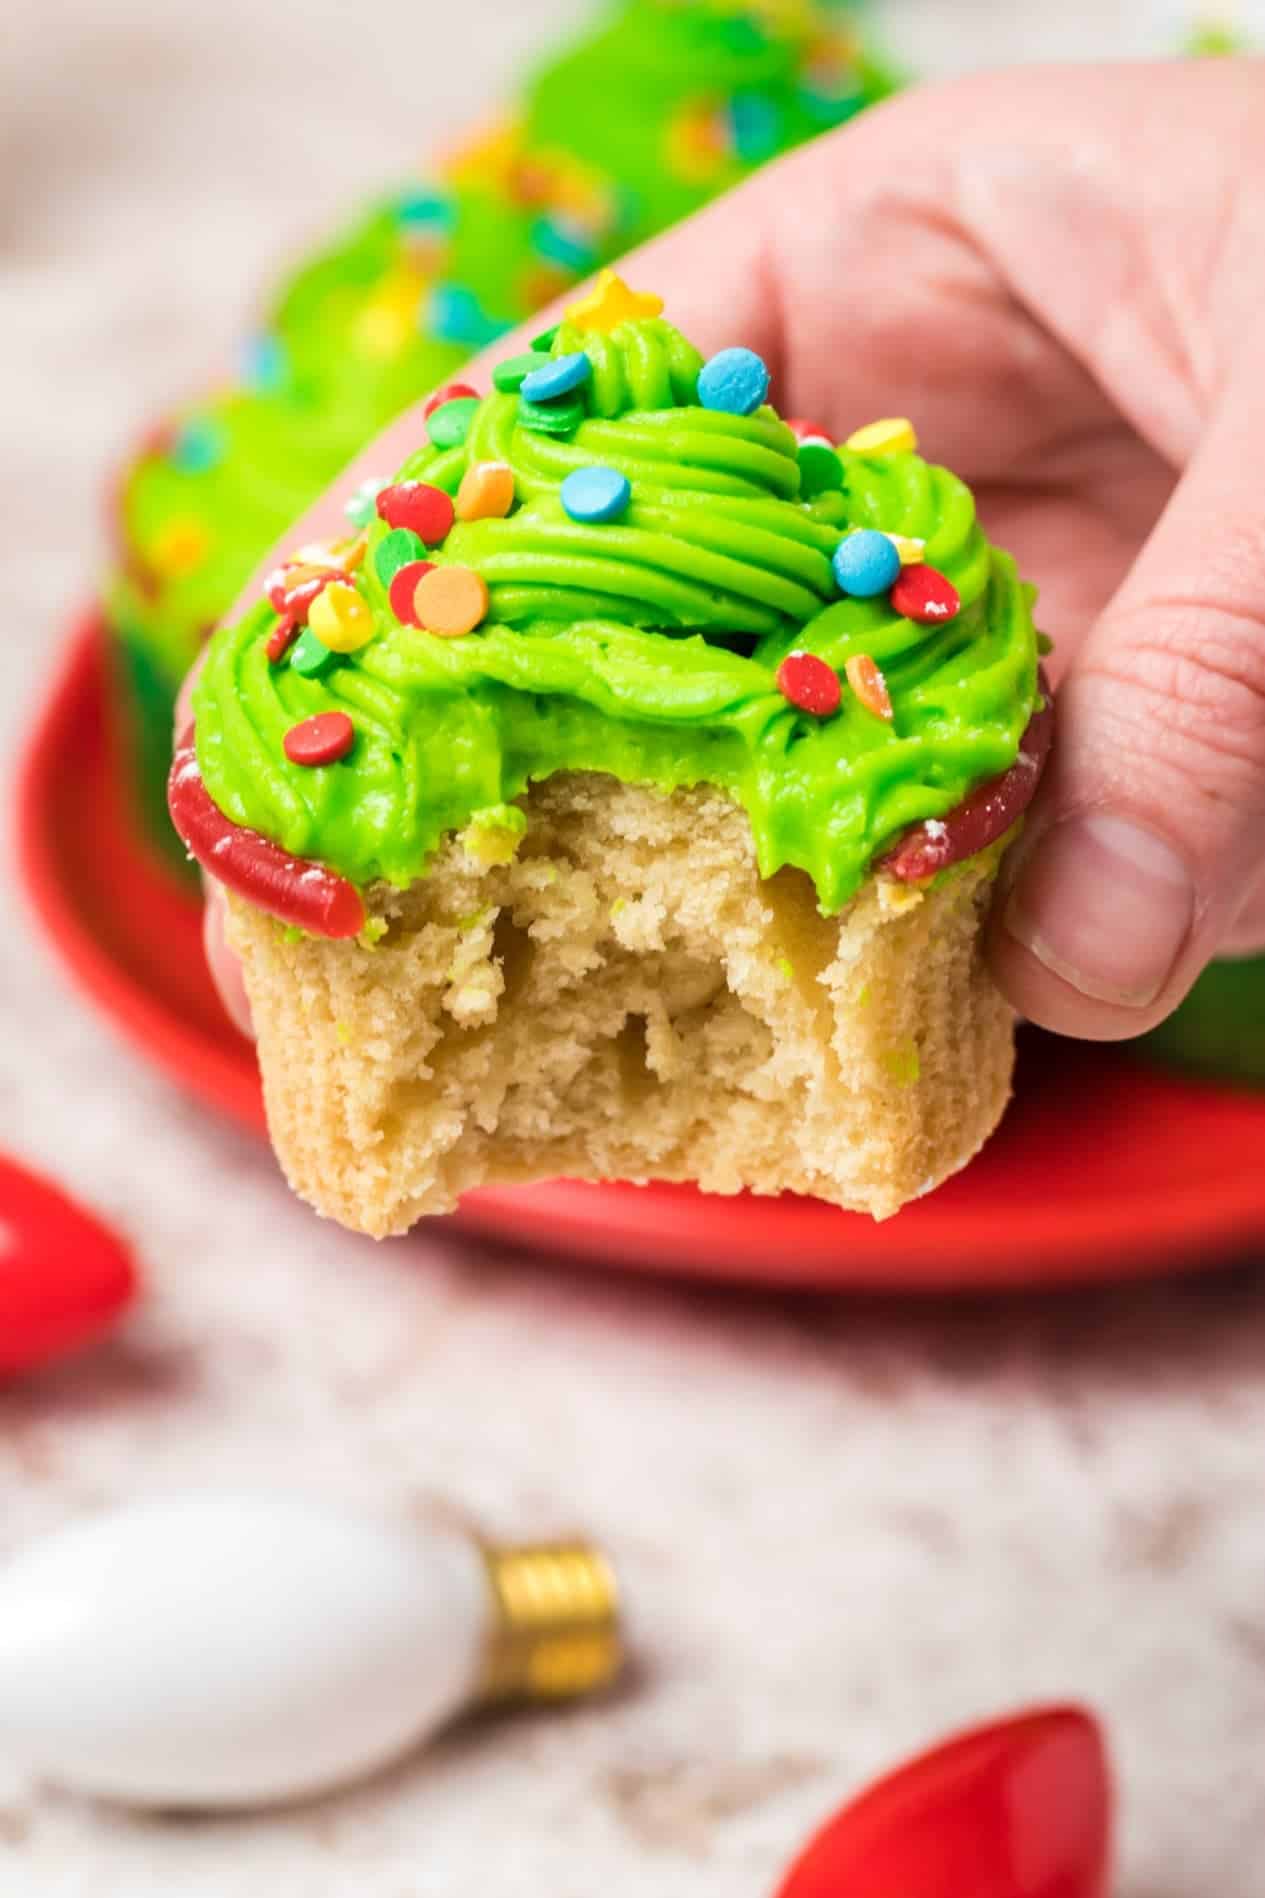 A Christmas tree cupcake being held in a hand with a bite out of it.